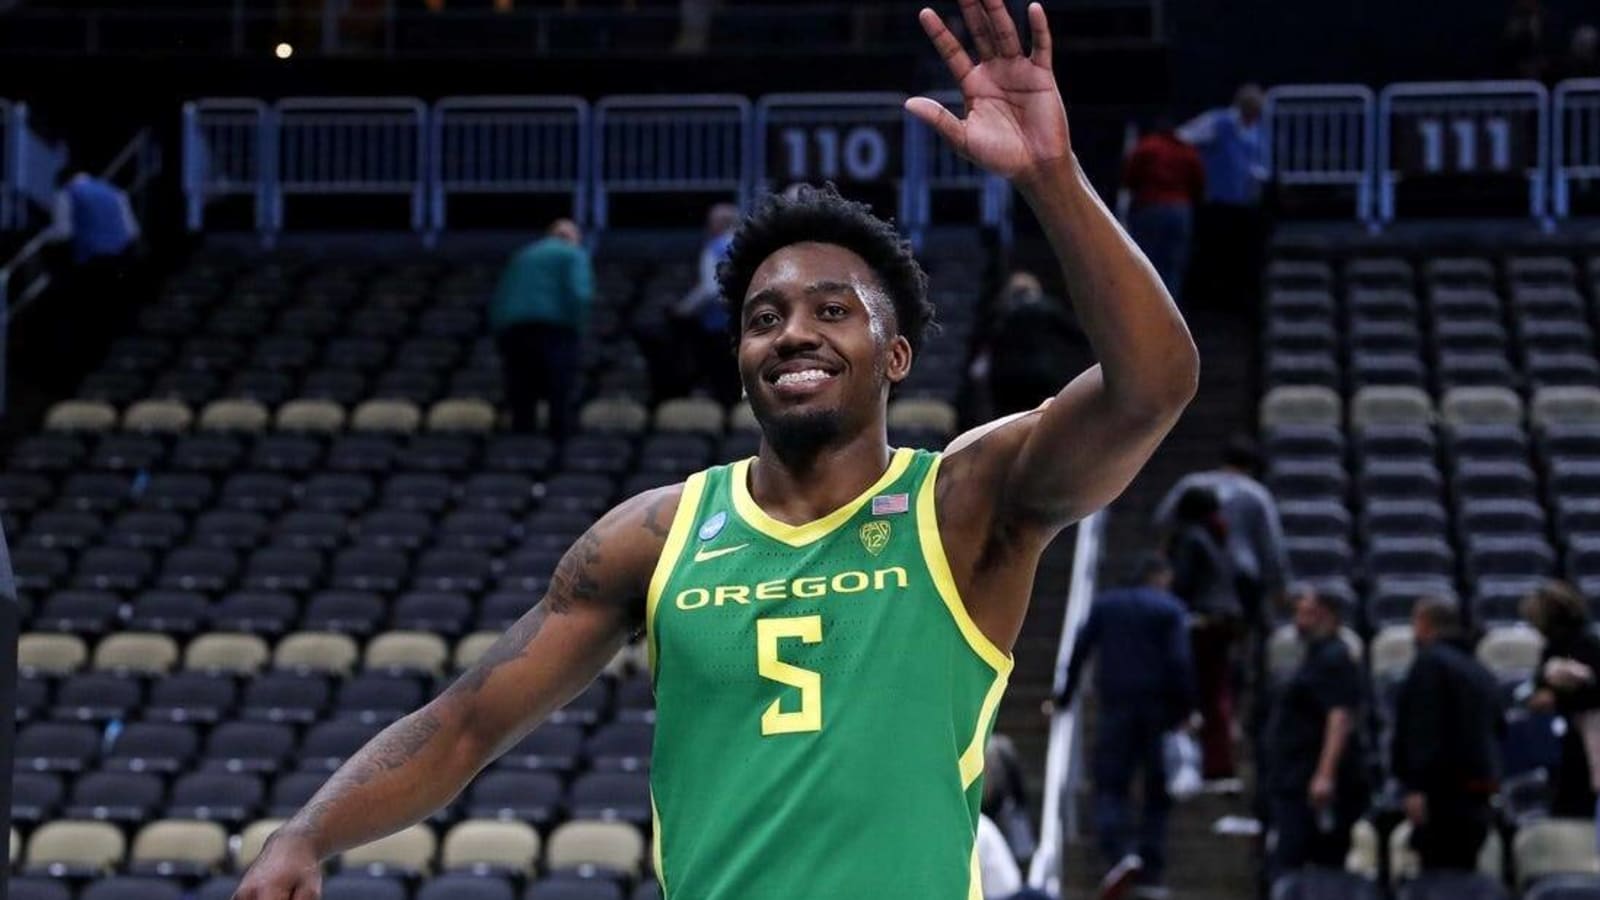 Jermaine Couisnard powers 11th seed Oregon past 6th seed South Carolina